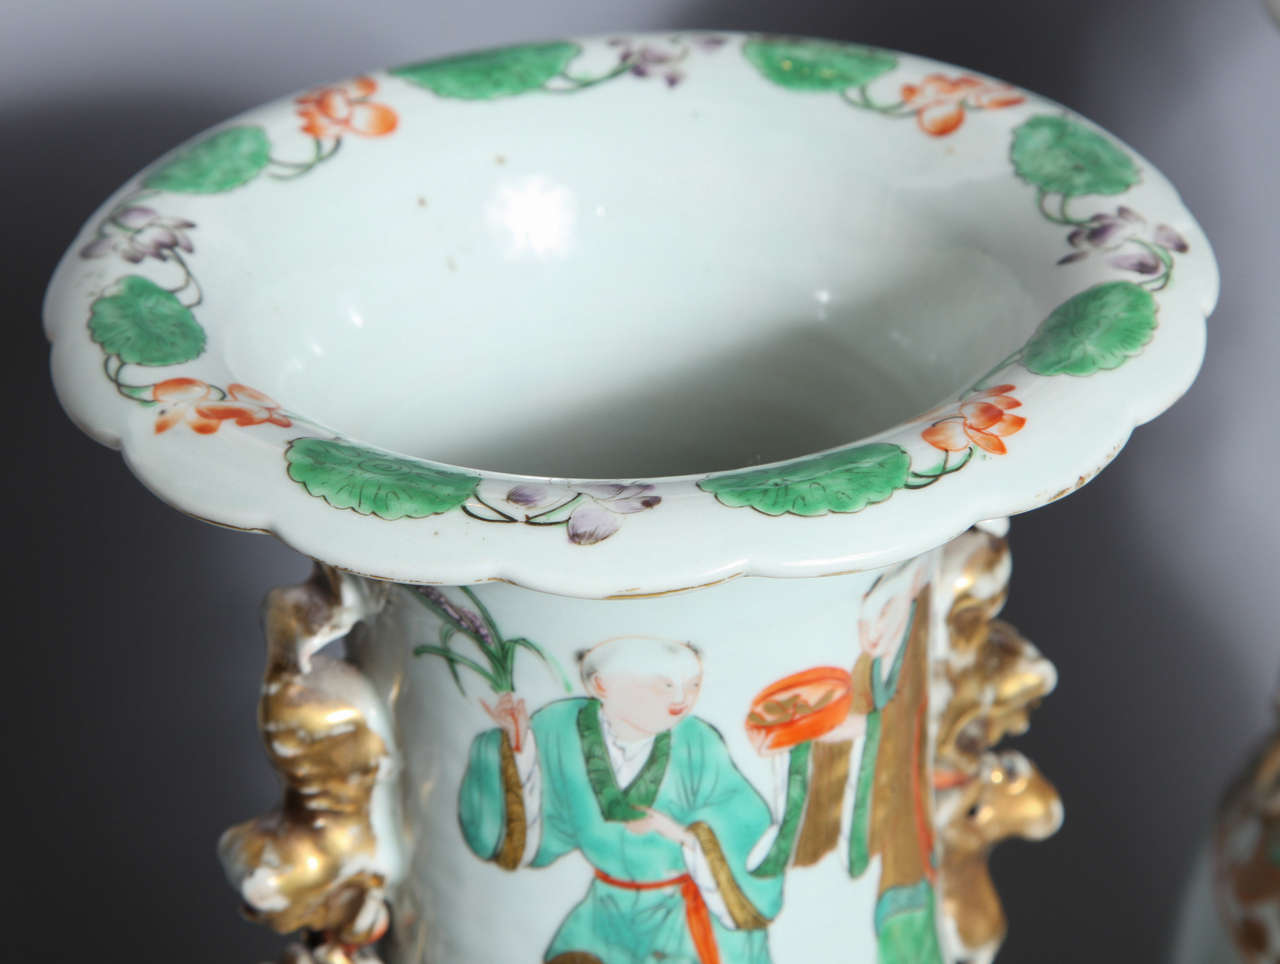 Pair of Chinese Porcelain Vases with Painted Figures and Chinese Poems in Gold For Sale 1